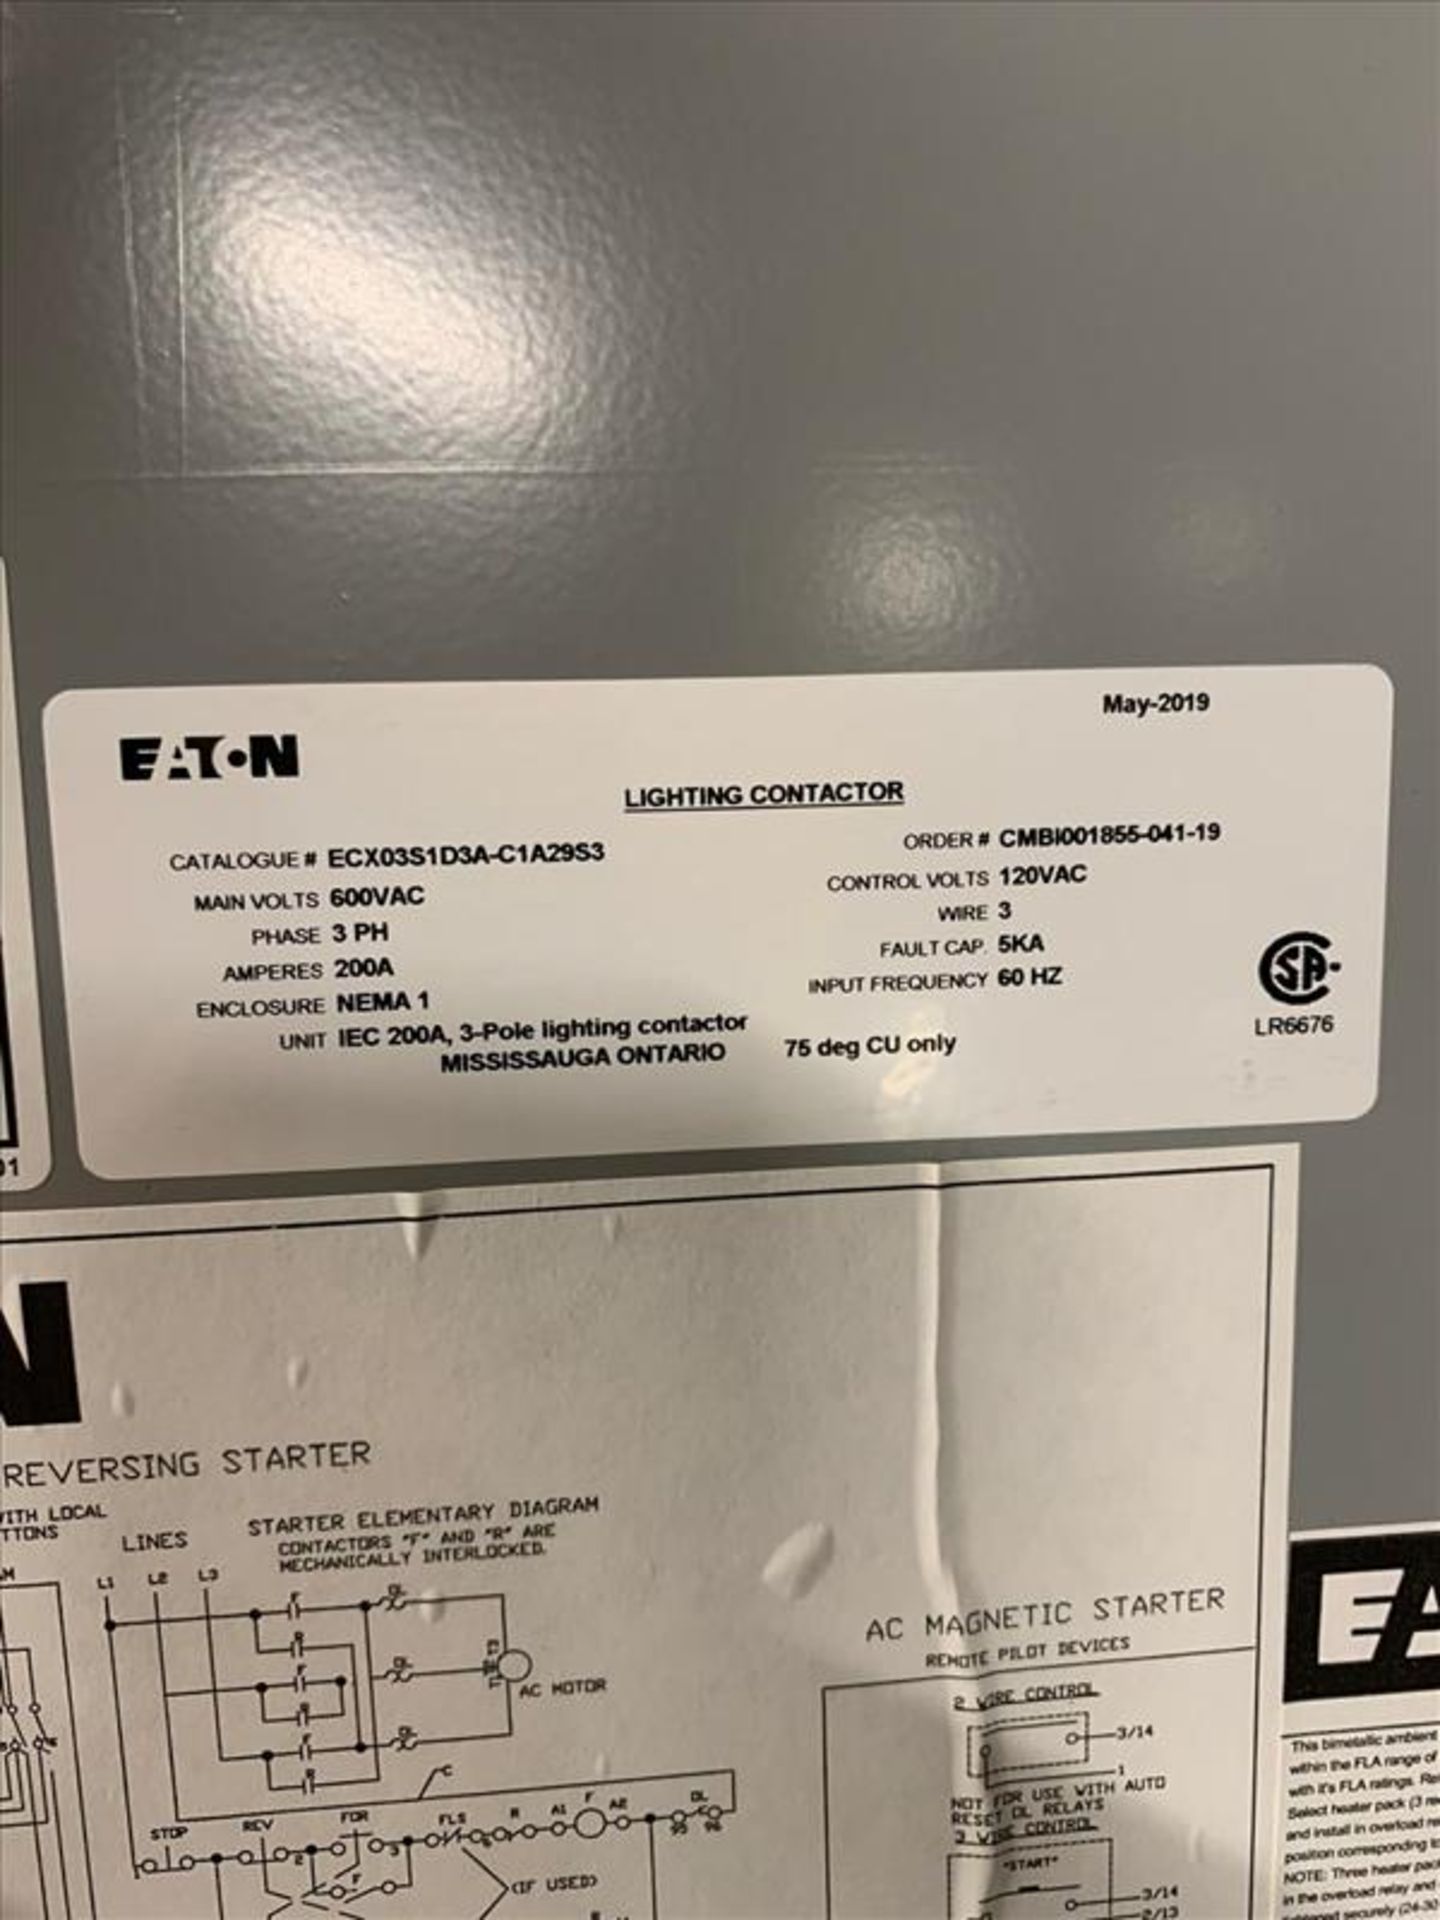 Eaton 3-Pole Lighting Contactor, unit IEC 200A, 120 volts, 3 phase, 60 Hz - Image 3 of 3